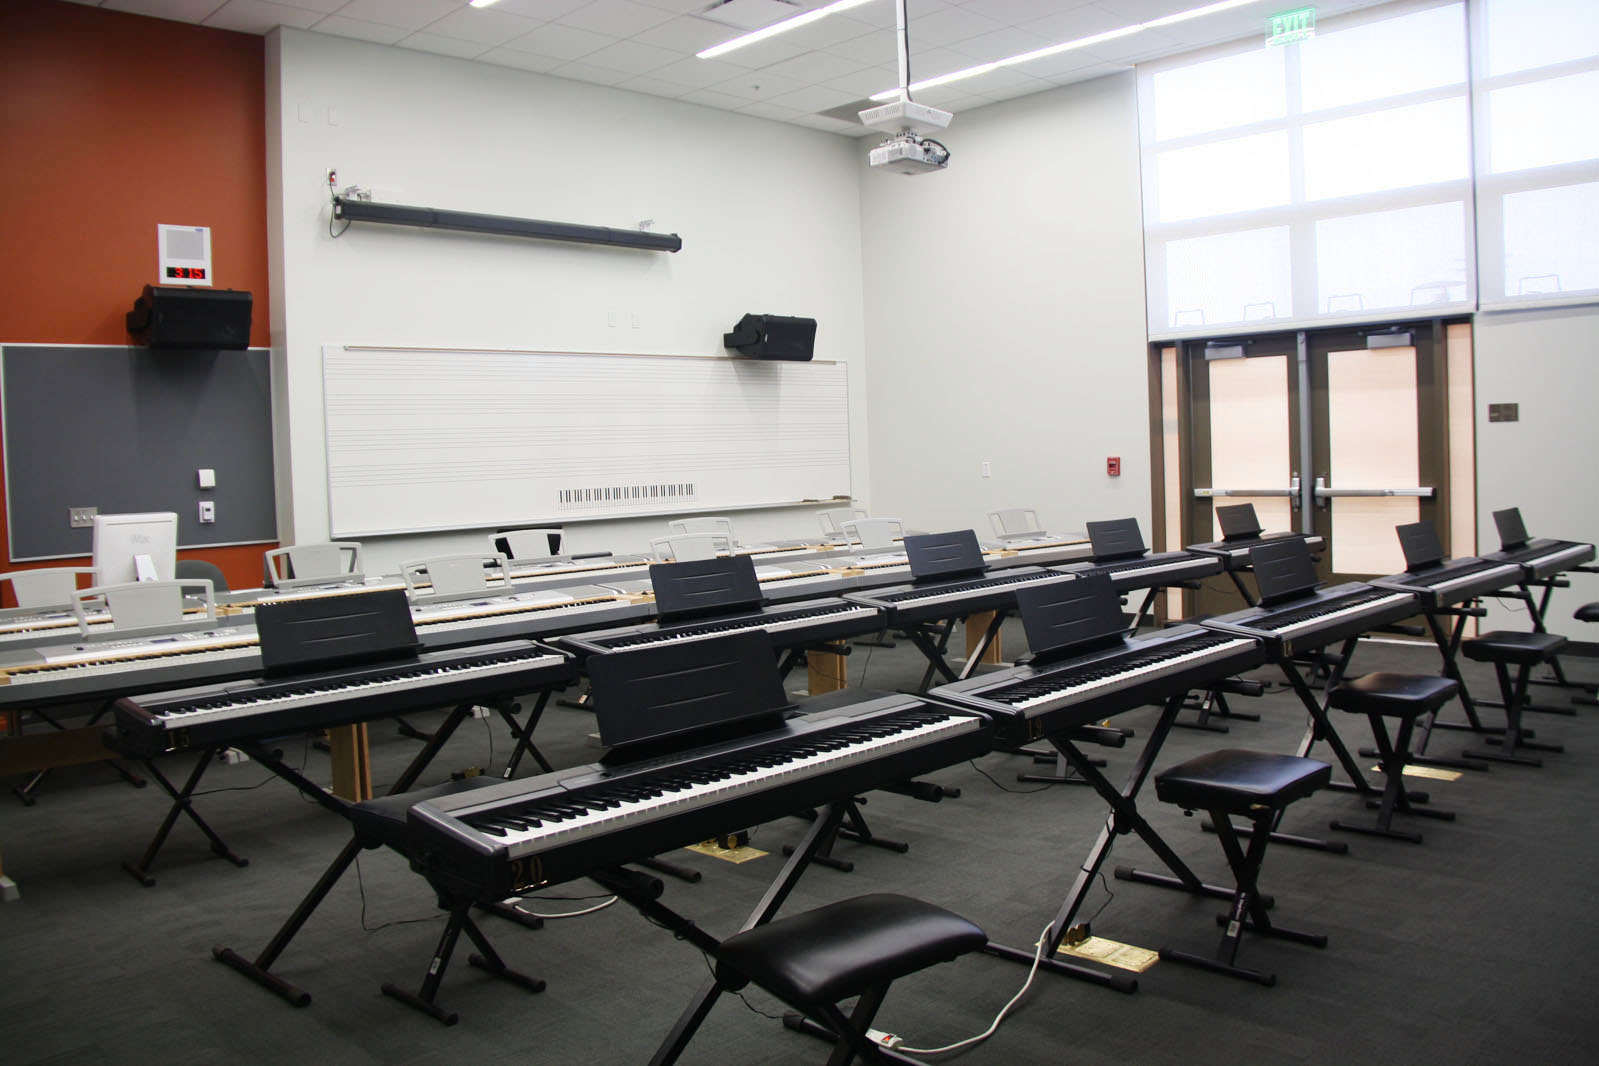 Helix High Performing Arts Center keyboard room